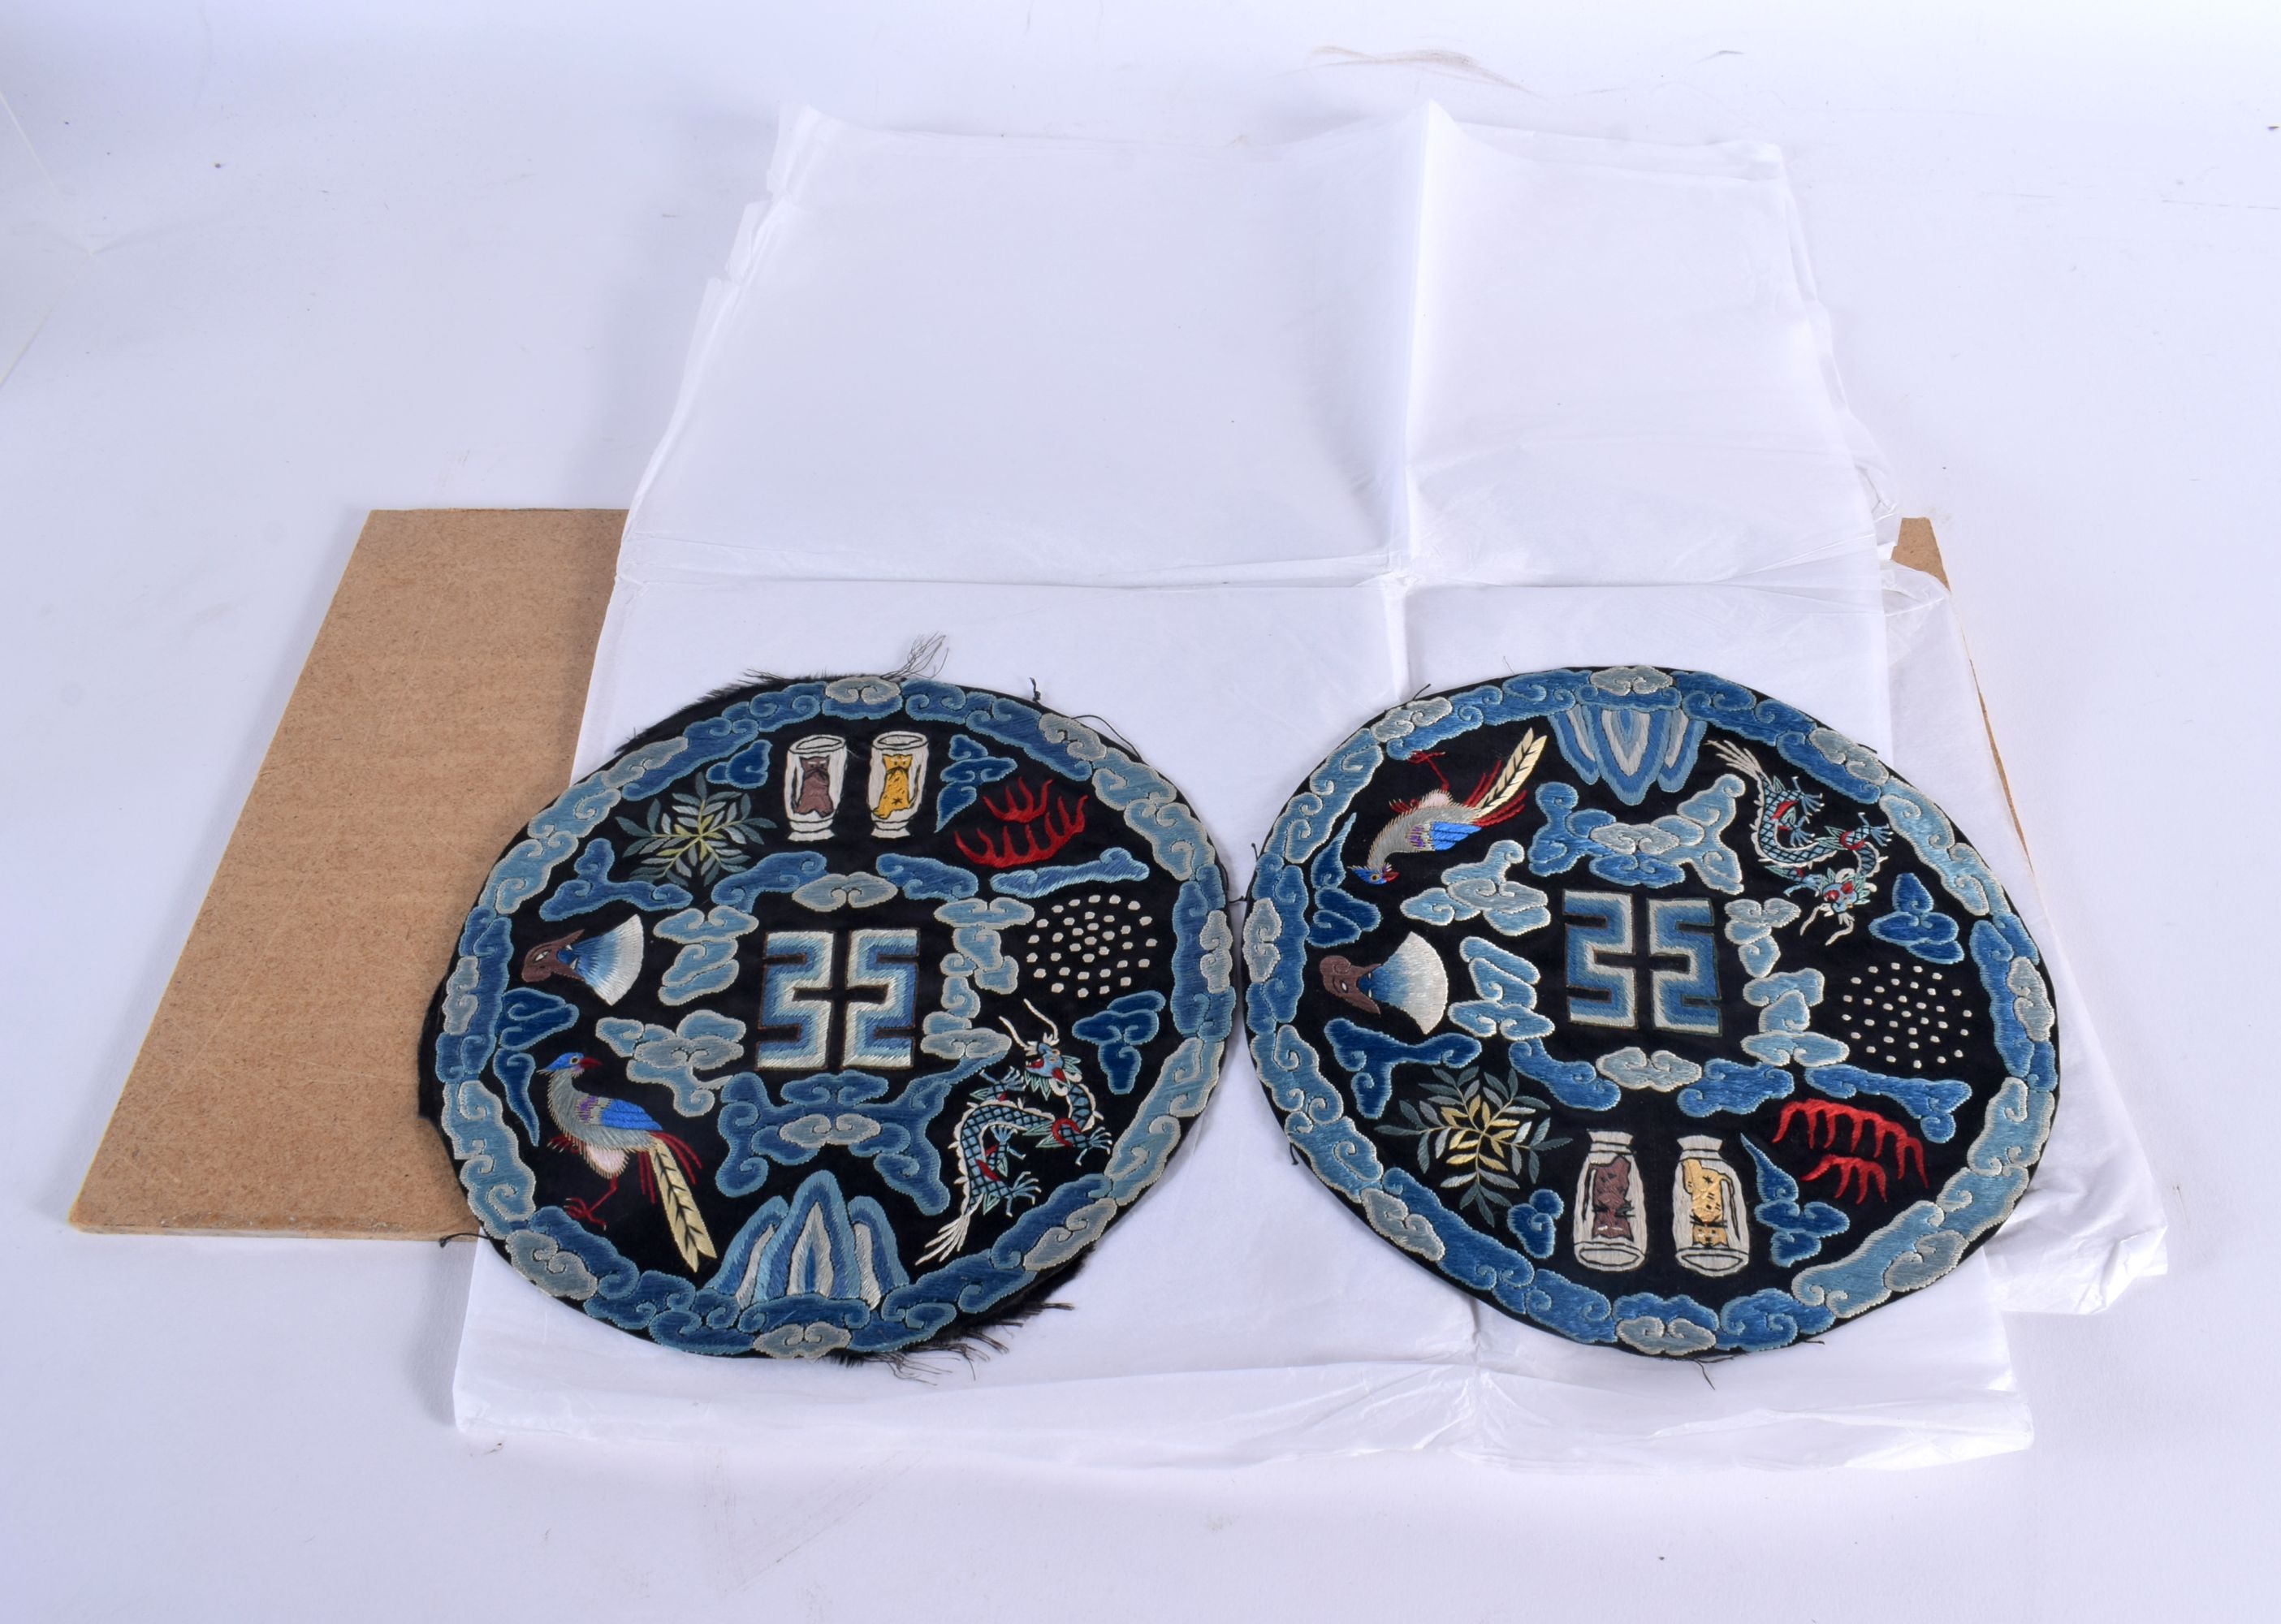 A RARE PAIR OF EARLY 20TH CENTURY CHINESE SILK ROUNDELS depicting cats and symbols. 19 cm diameter.